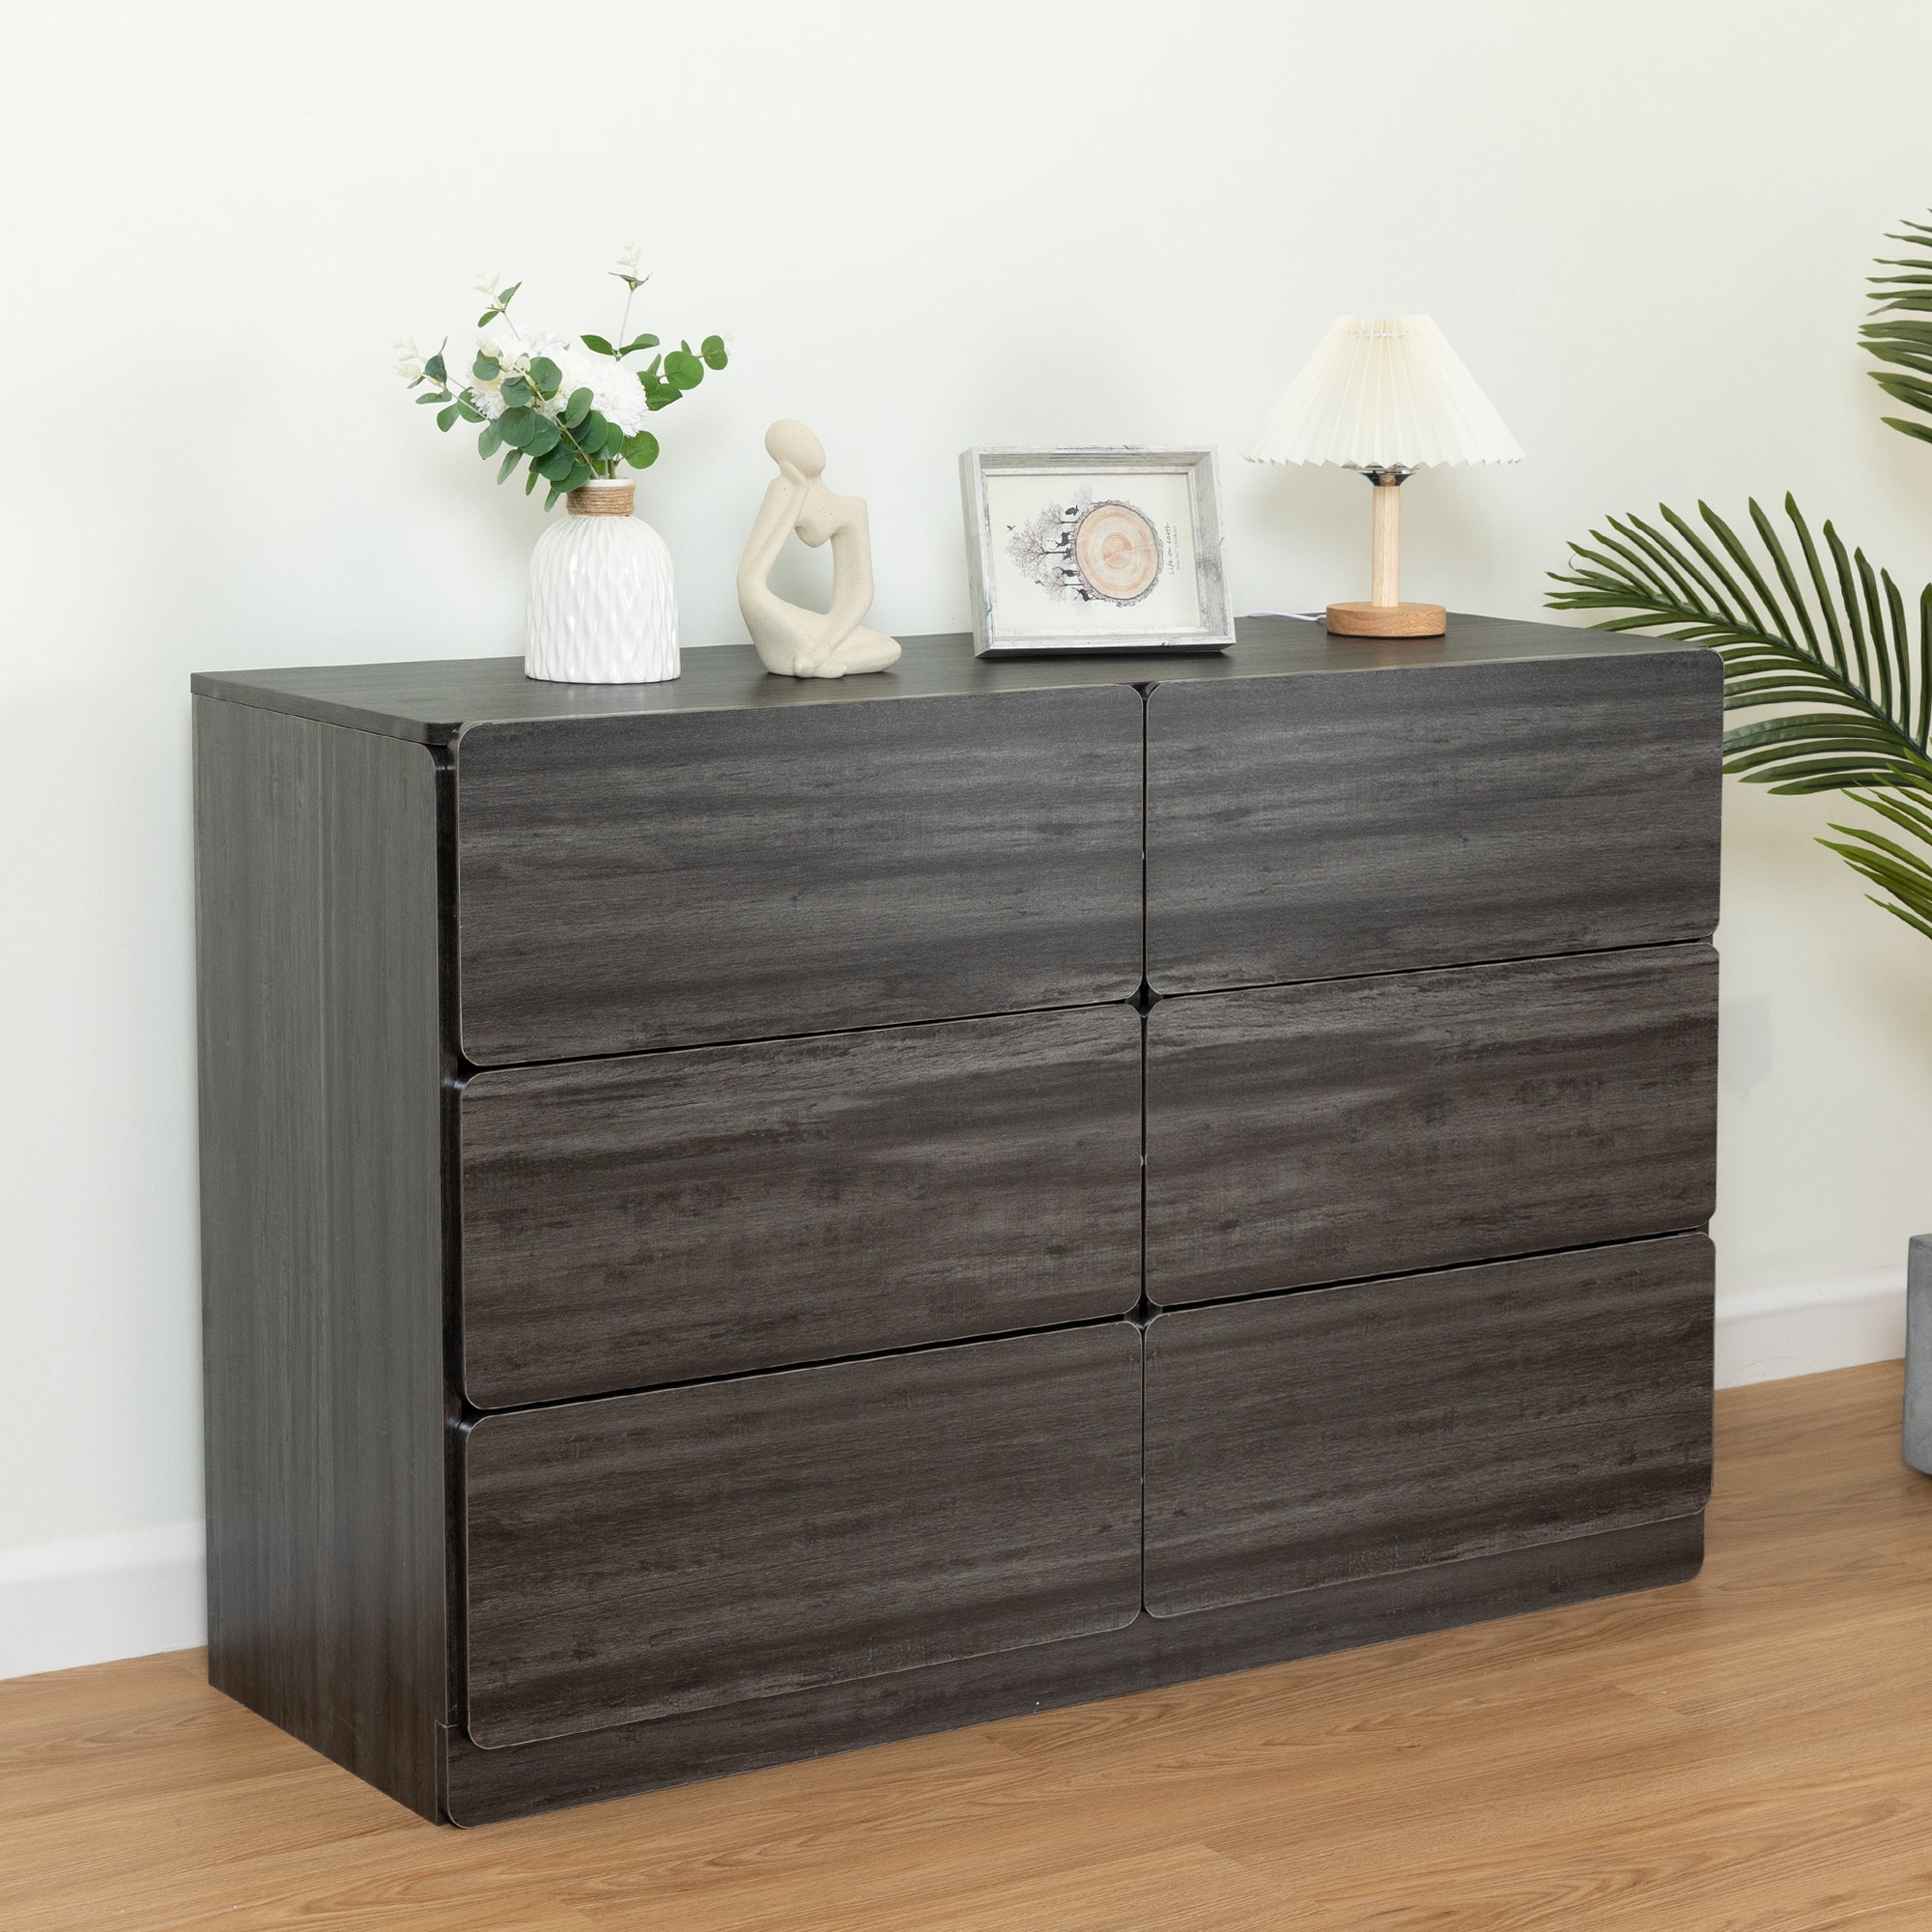 🆓🚛 Drawer Dresser Cabinet, Sideboard, Bar Cabinet, Buffet Server Console, Table Storge Cabinets, Flat Out The Corners of The Drawers, Six Drawers, for Dining Room, Living Room, Bedroom, Kitchen Hallway, Dark Gray